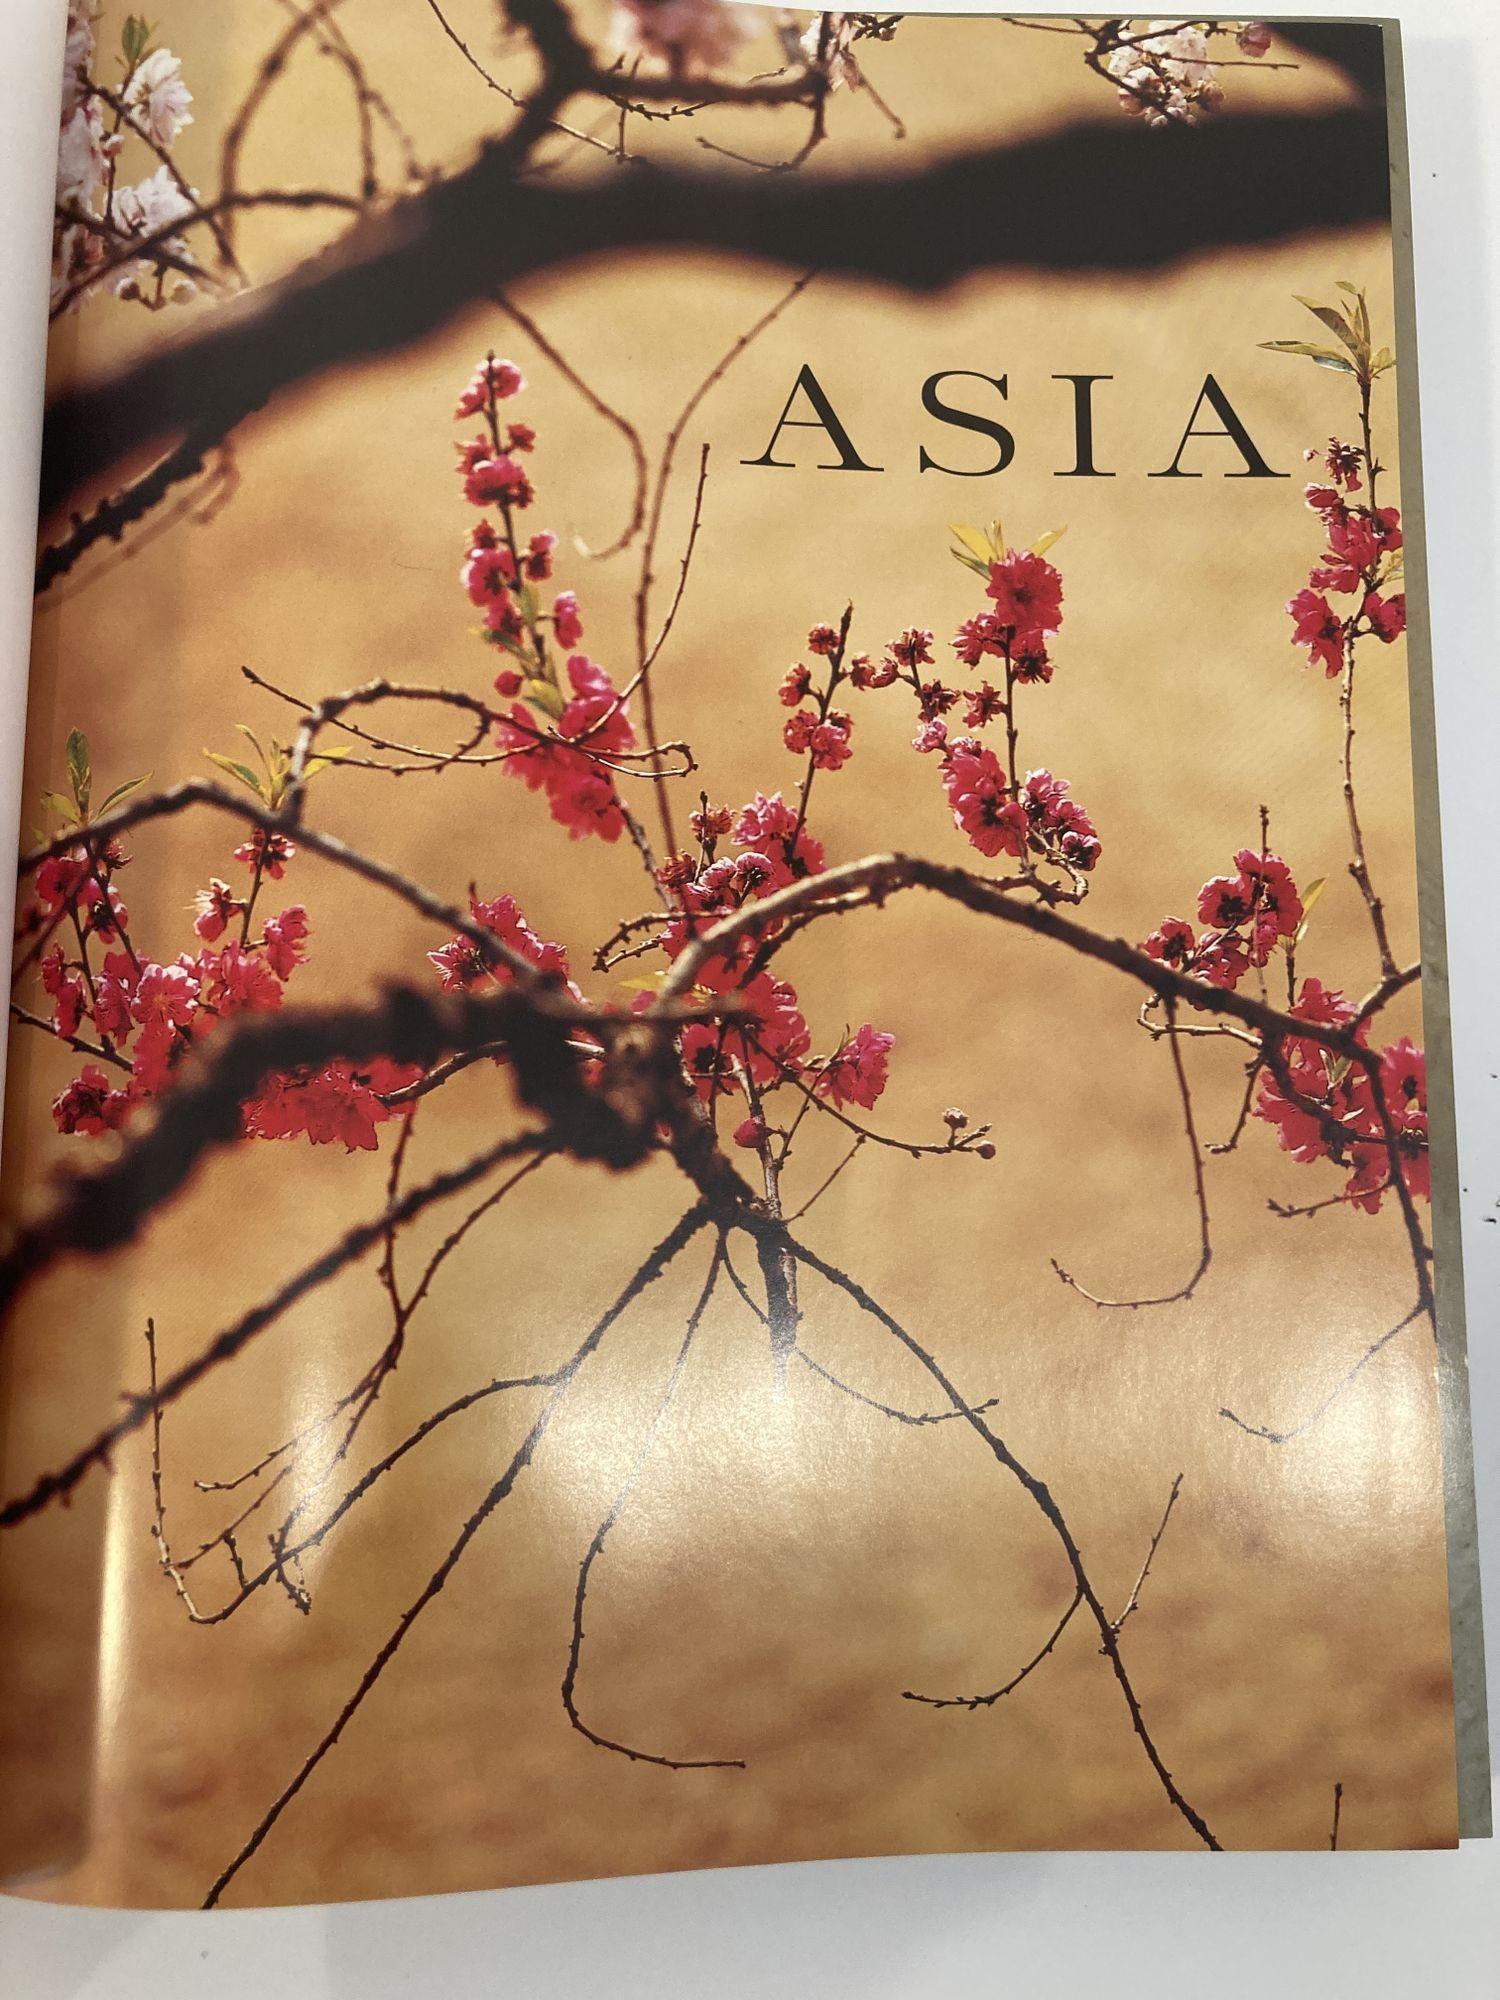 Paper Asia by Olivier Follmi Large Hardcover Book 2008 For Sale